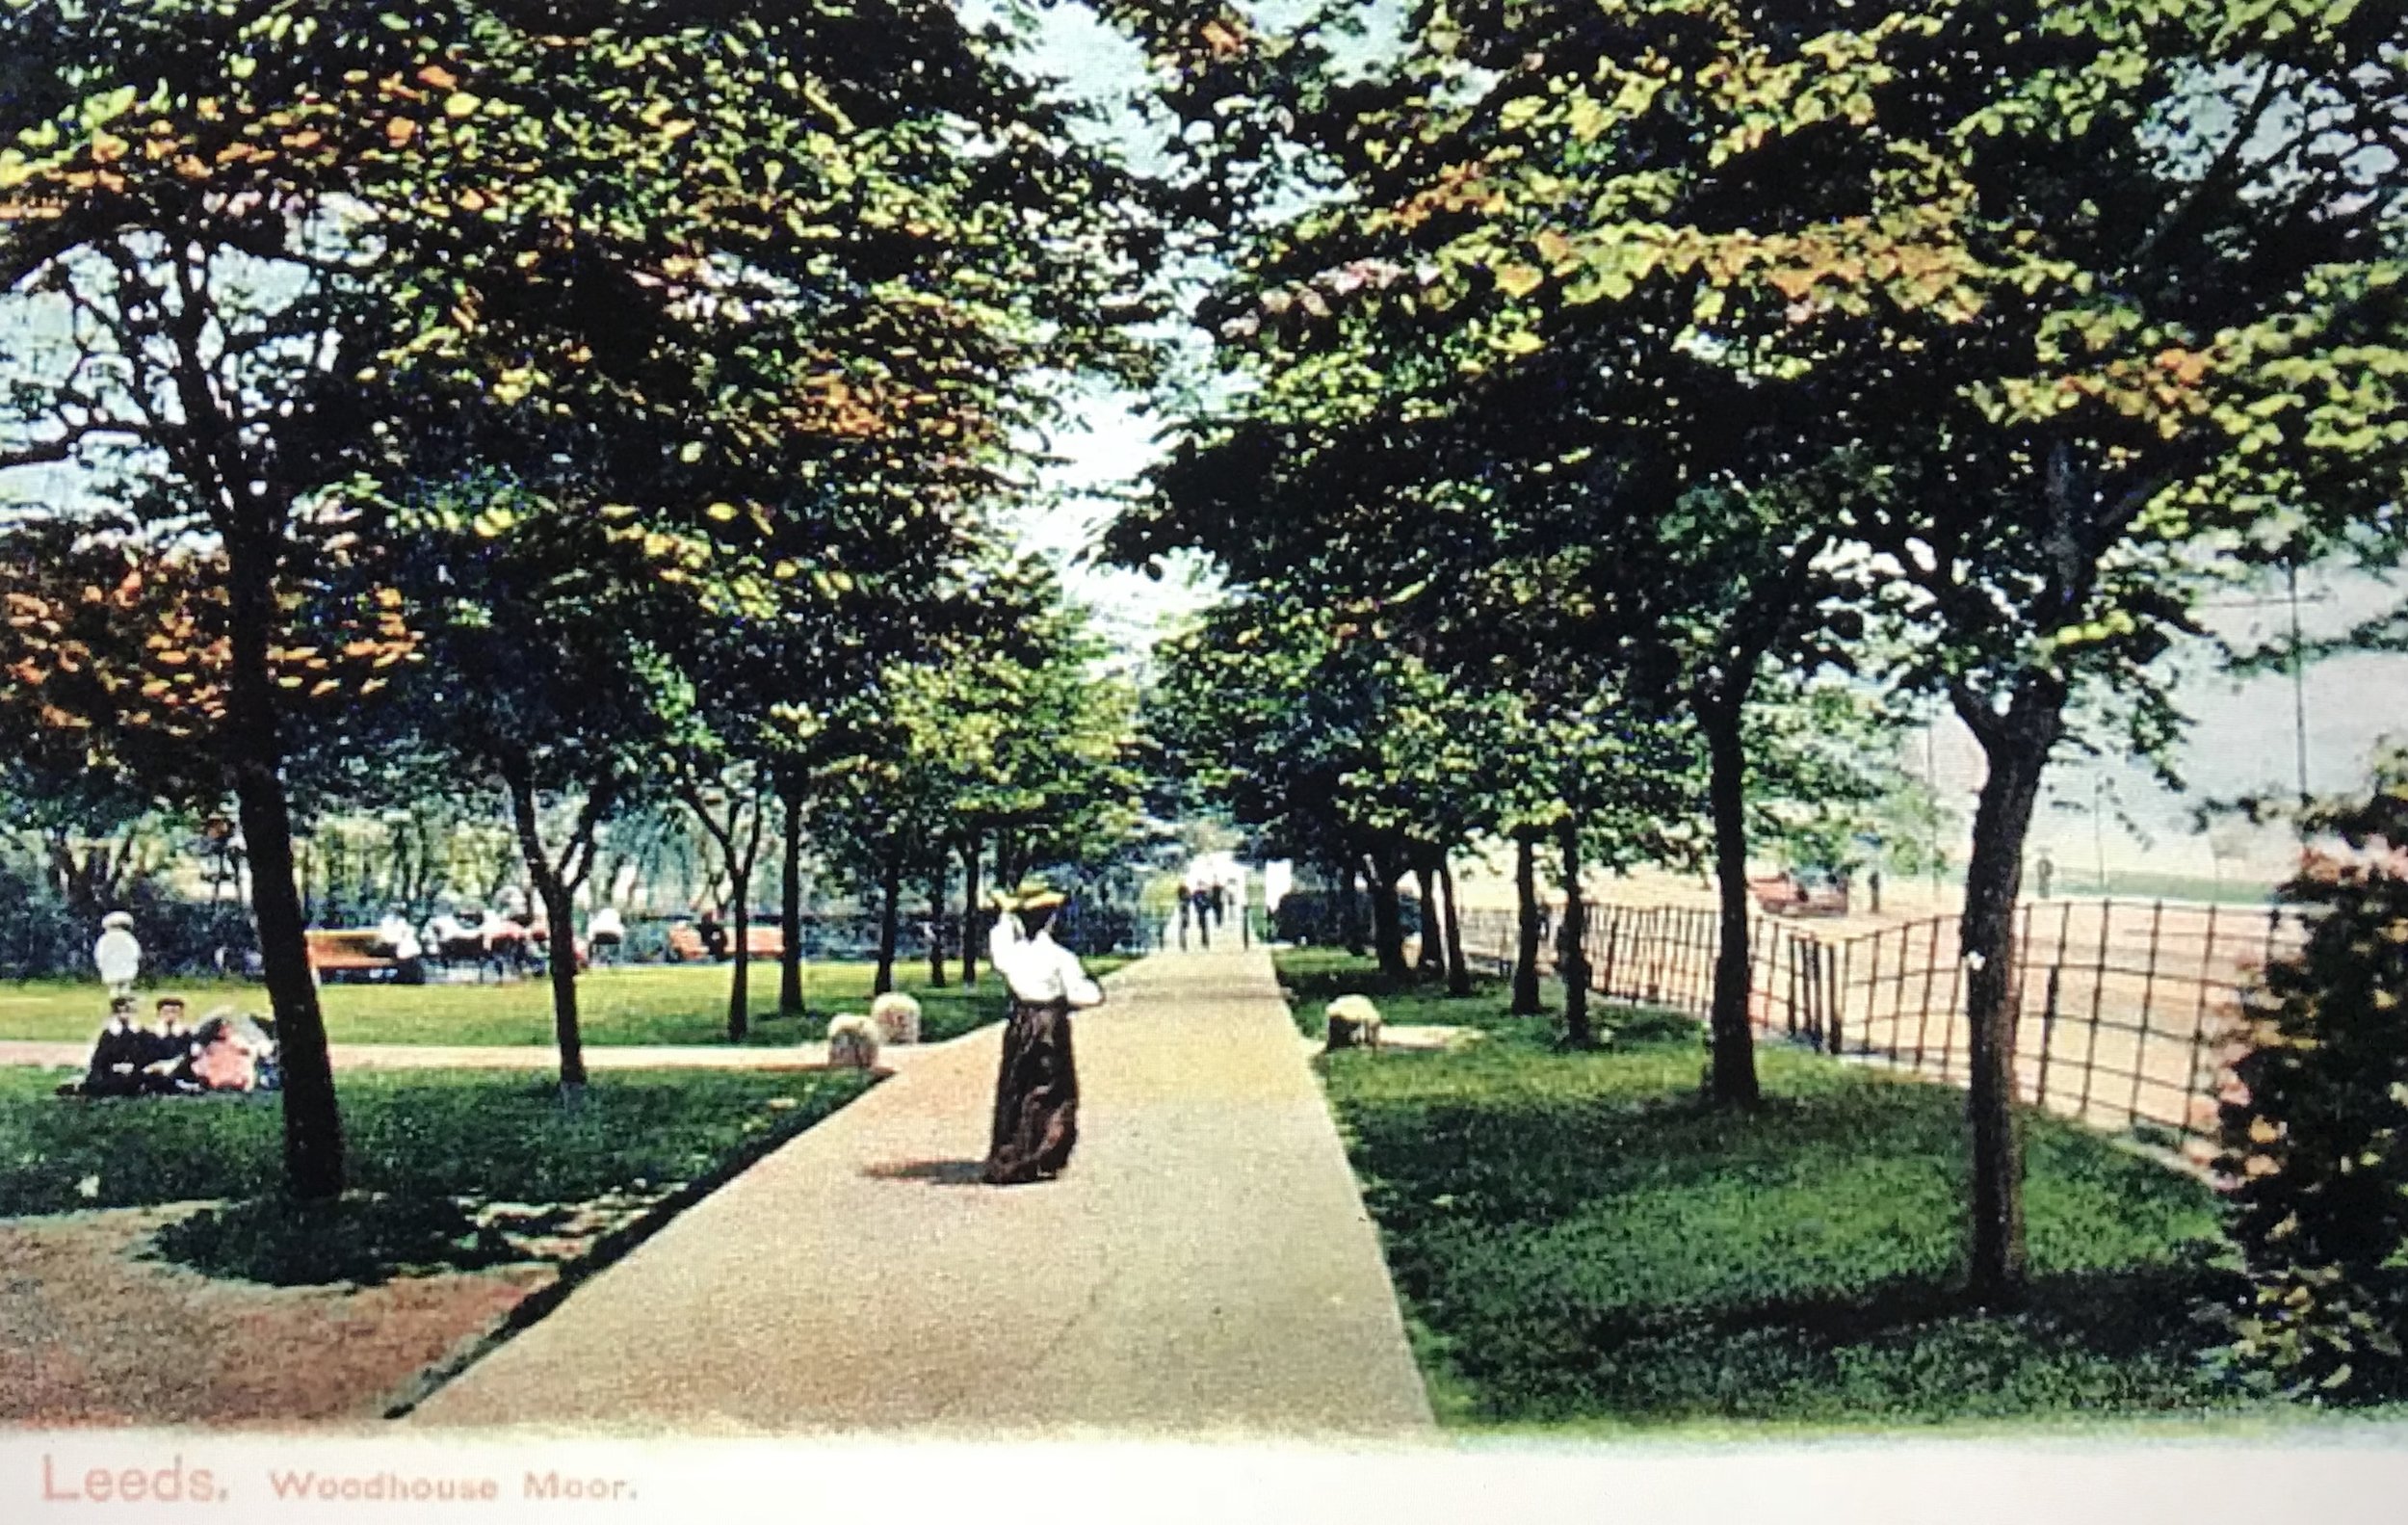 The Avenue, Woodhouse Moor, undated